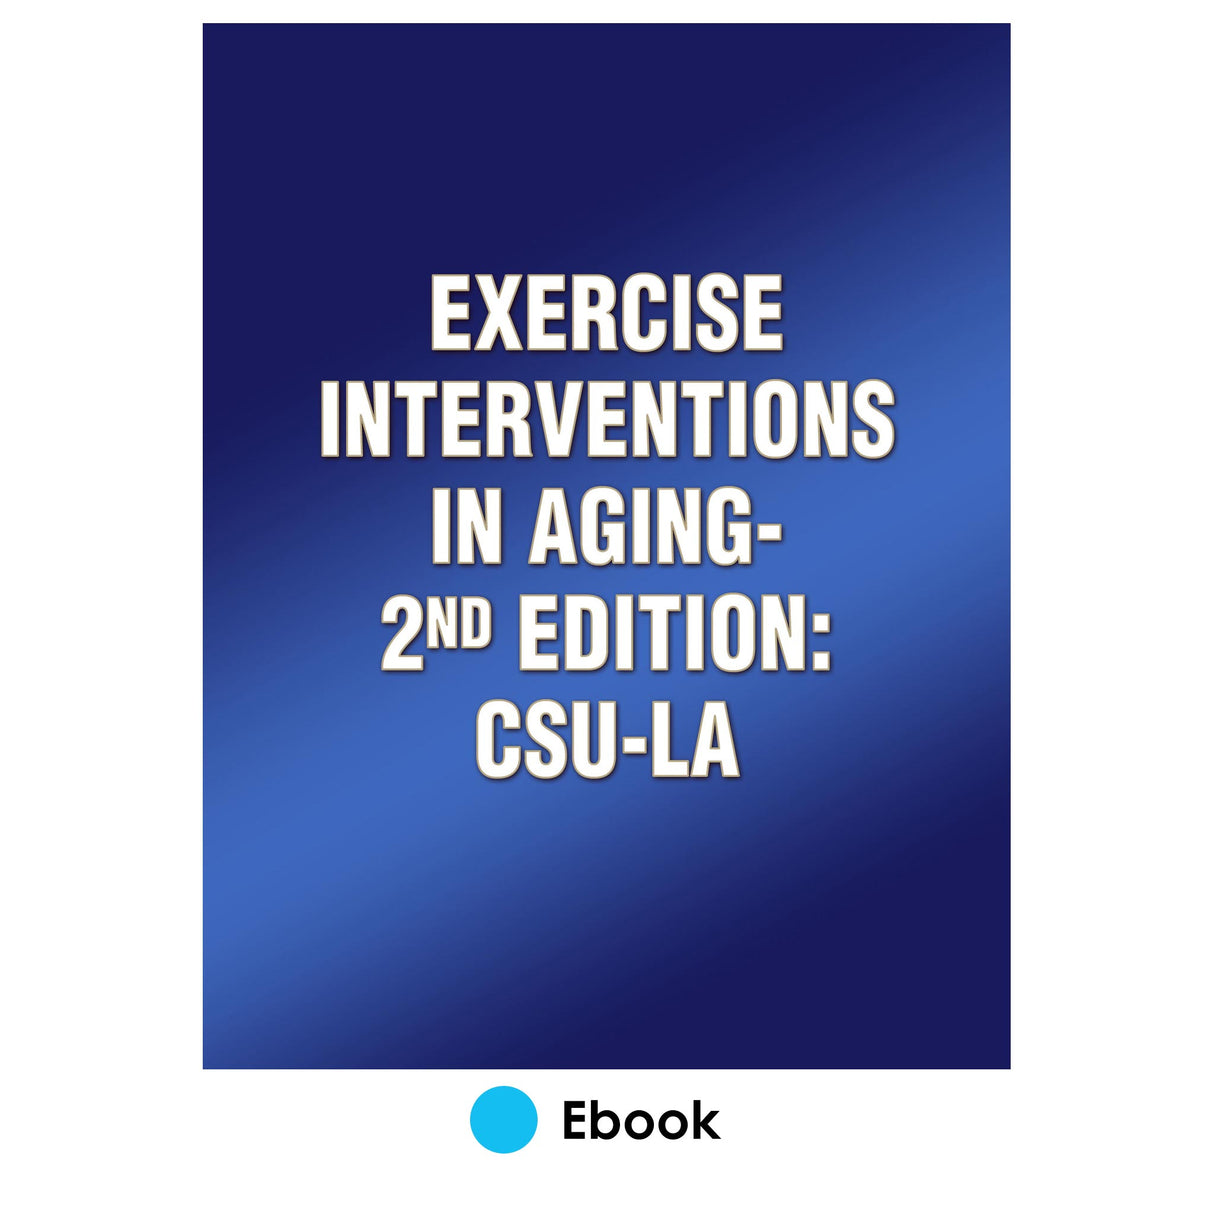 Exercise Interventions in Aging-2nd Edition: CSU-LA